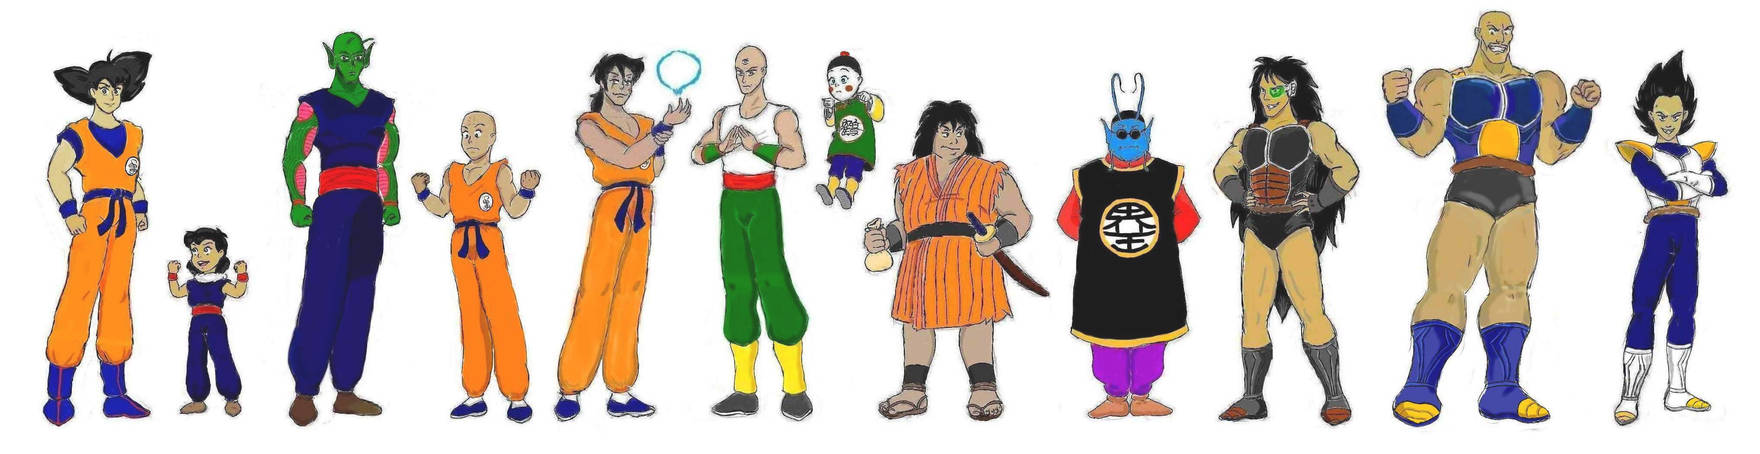 Dragon Ball Z - History Pages by 4ele on DeviantArt